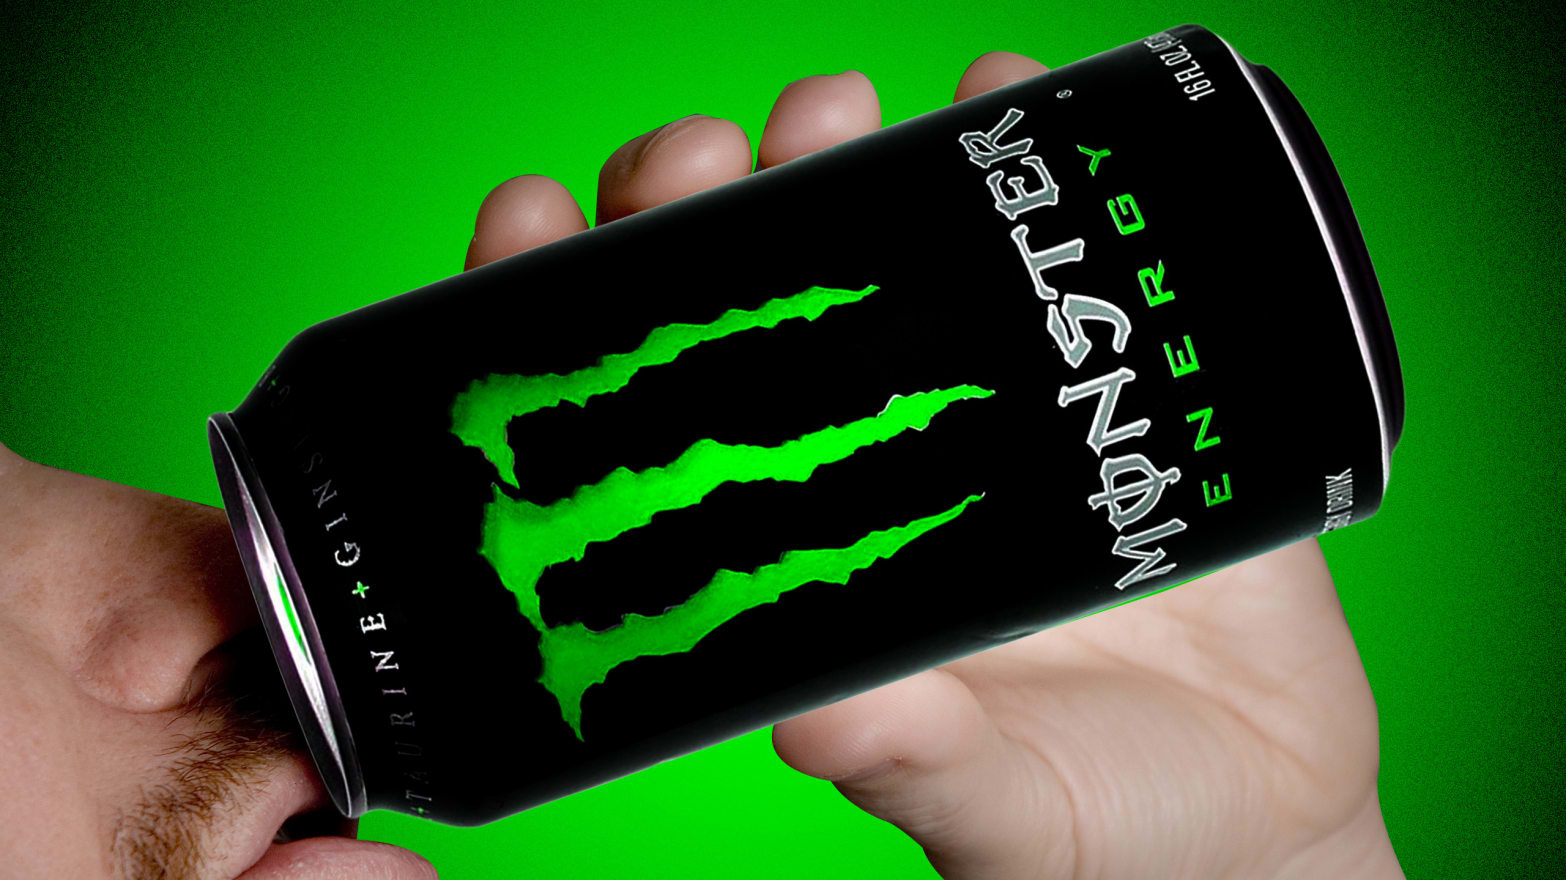 Monster Energy Drink Almost Killed Us Lawsuits Claim